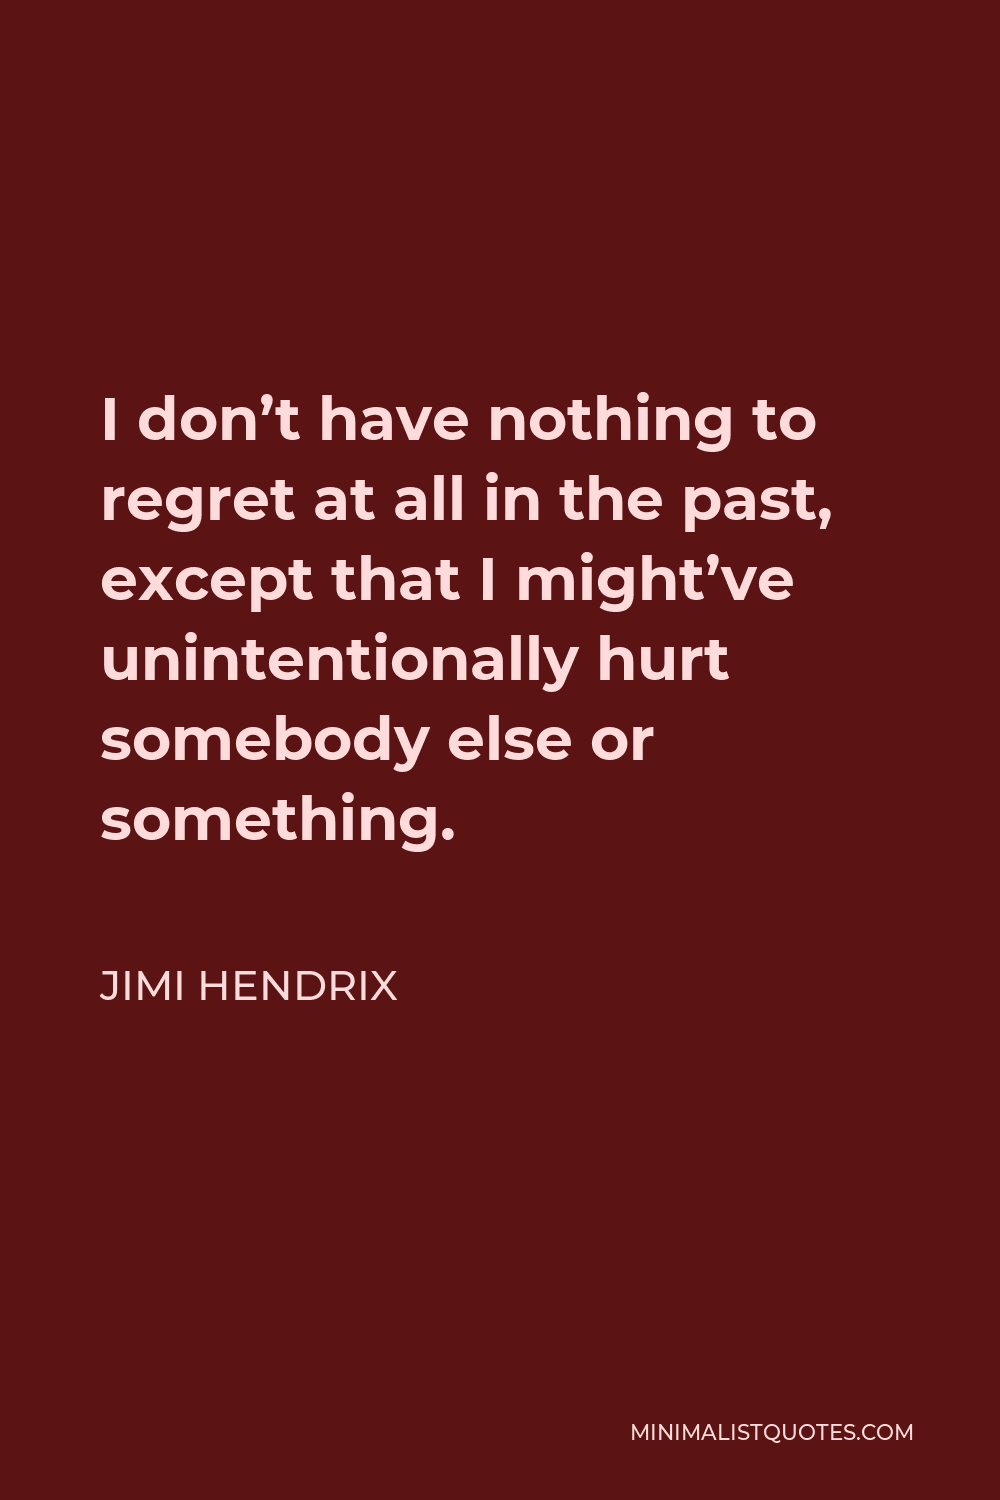 Jimi Hendrix Quote - I don’t have nothing to regret at all in the past, except that I might’ve unintentionally hurt somebody else or something.